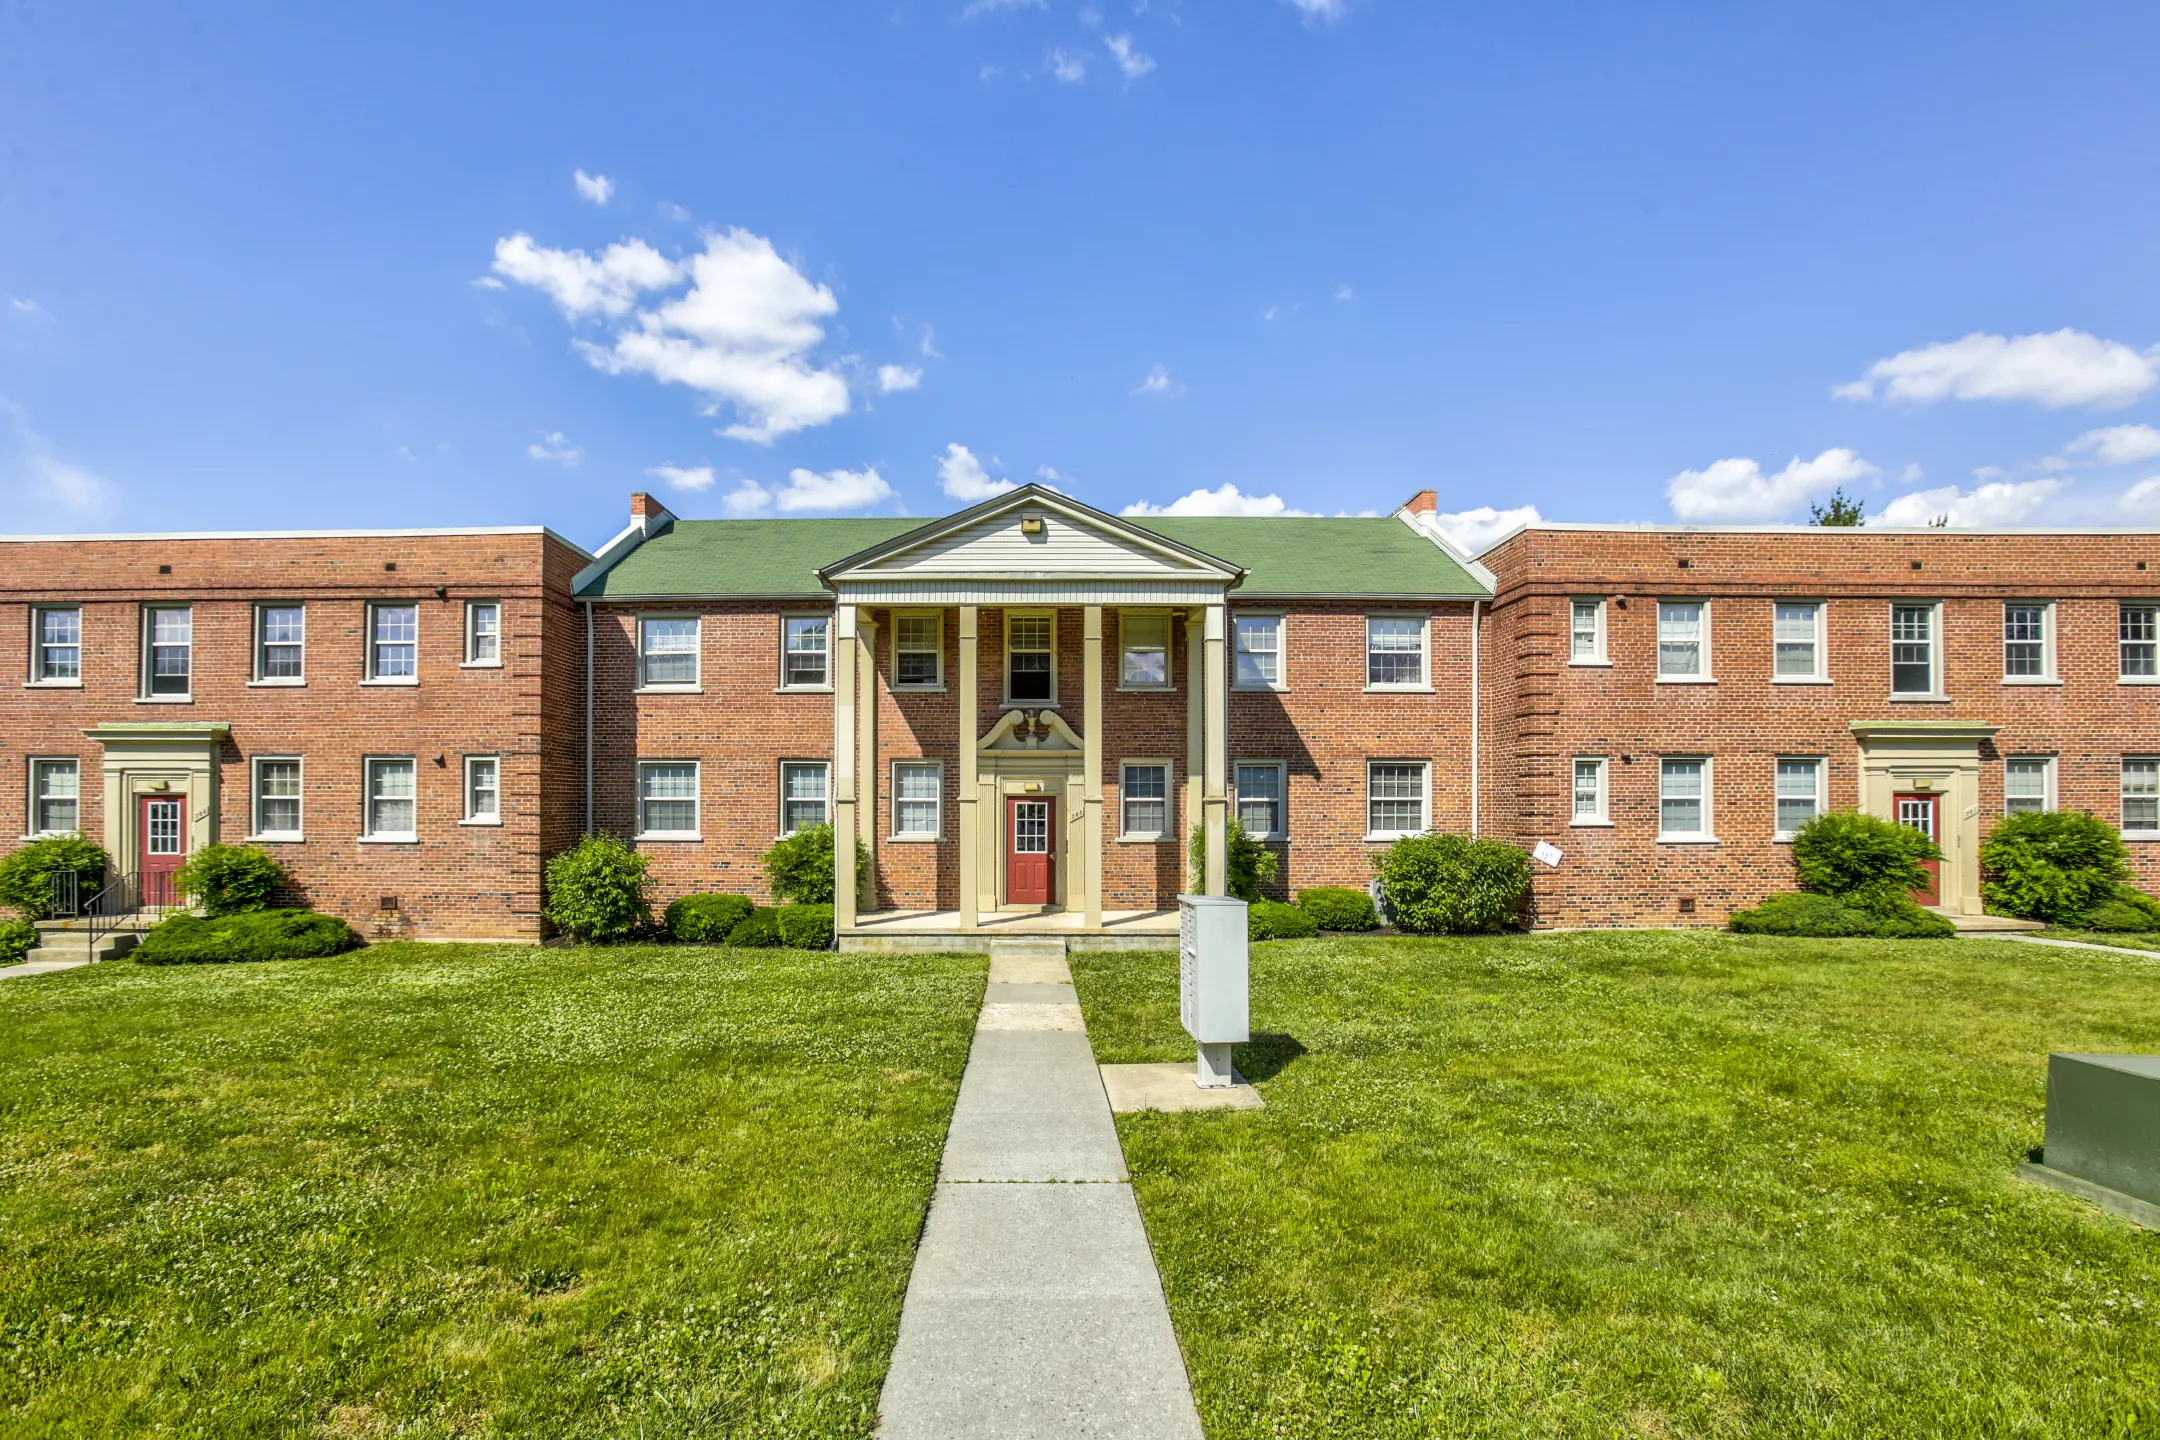 Building - Westhills Square Apartments - Baltimore, MD